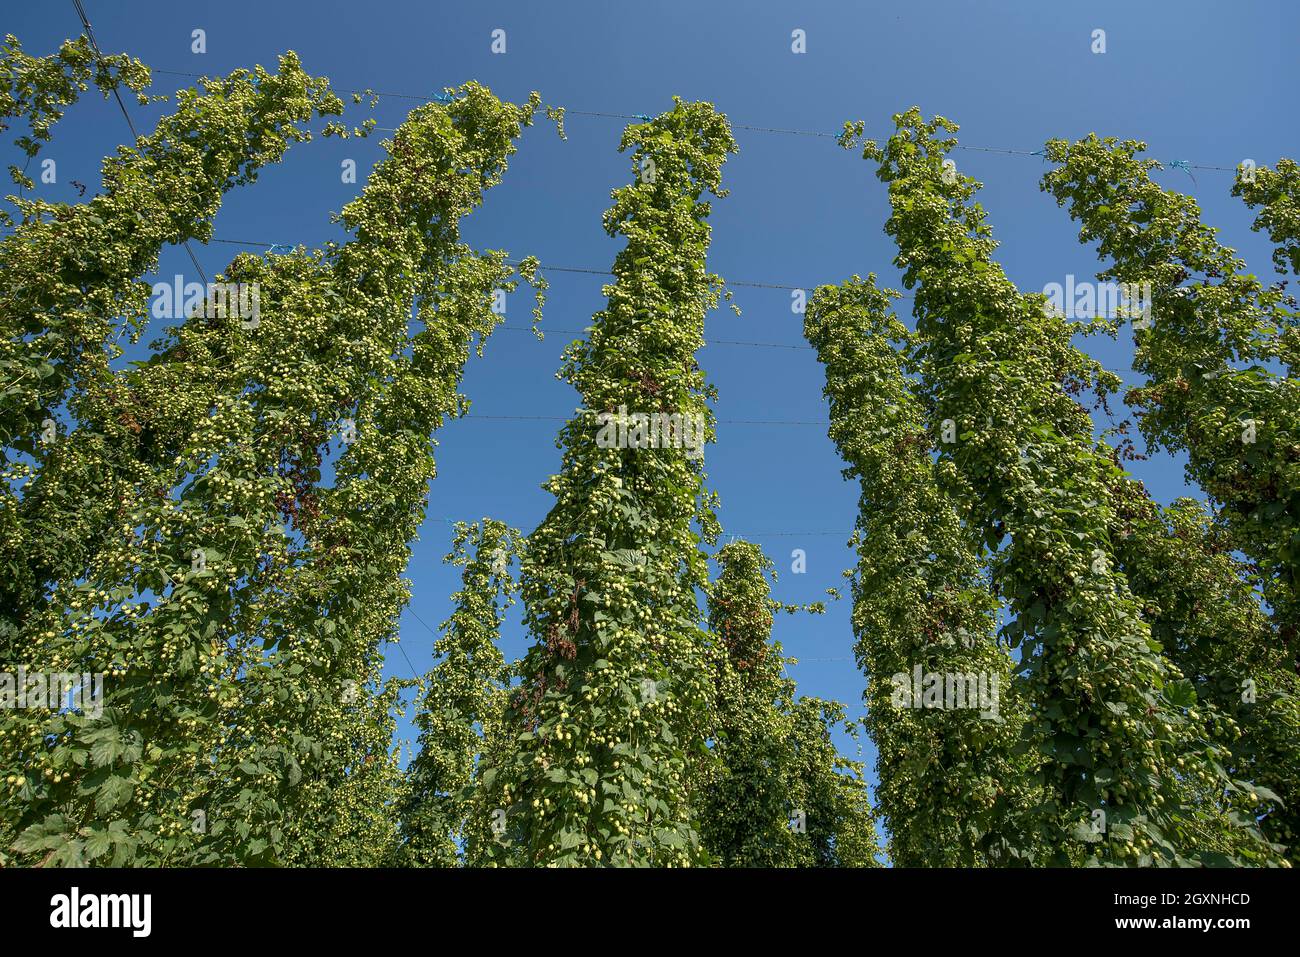 Hop cultivation, Common hop (Humulus), Bavaria, Germany Stock Photo